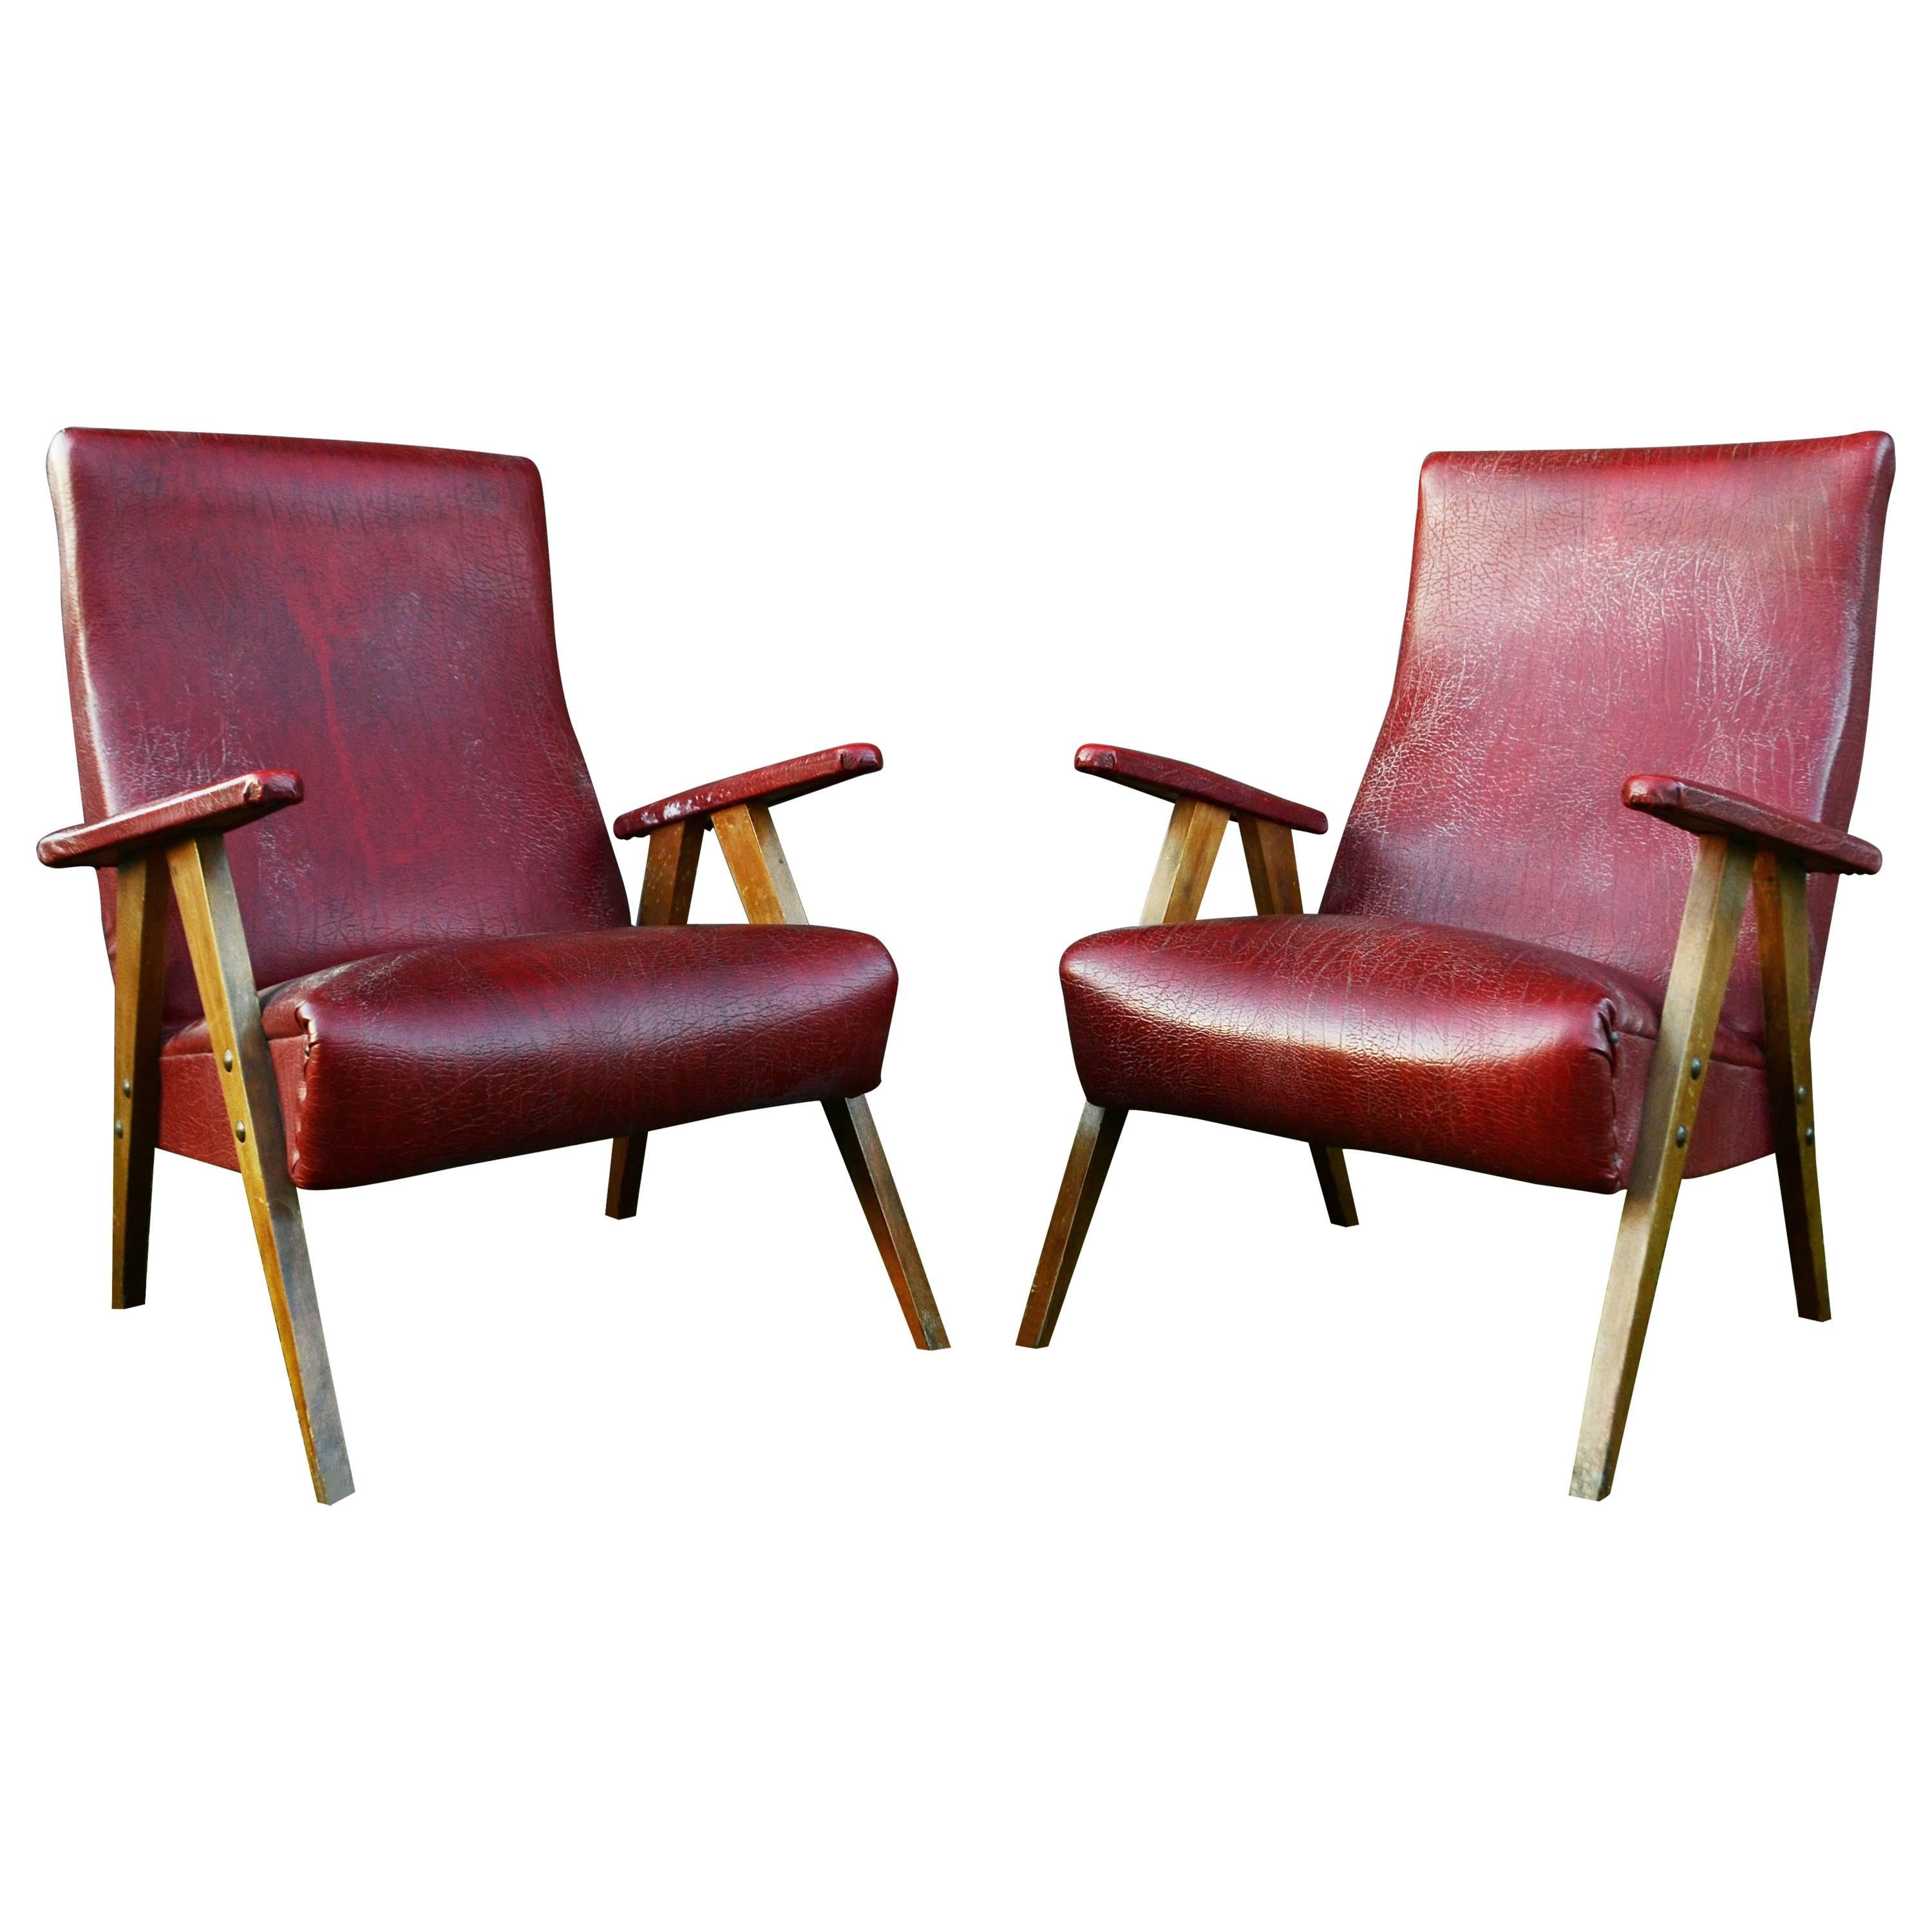 Vintage Red Leather Armchairs, circa 20th Century For Sale